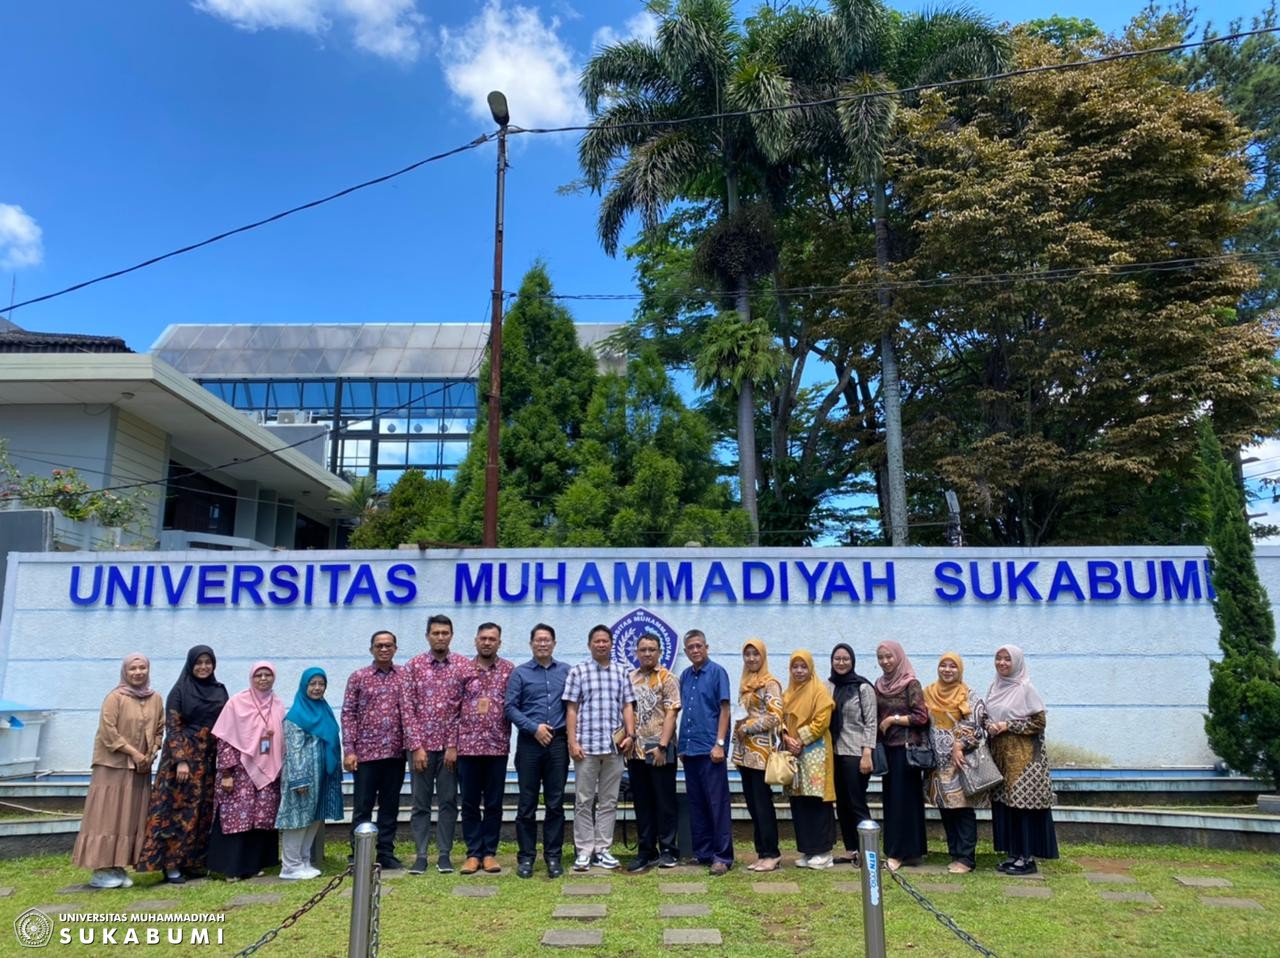 Campus in Sukabumi Conducts Benchmarking Visit to UMMI